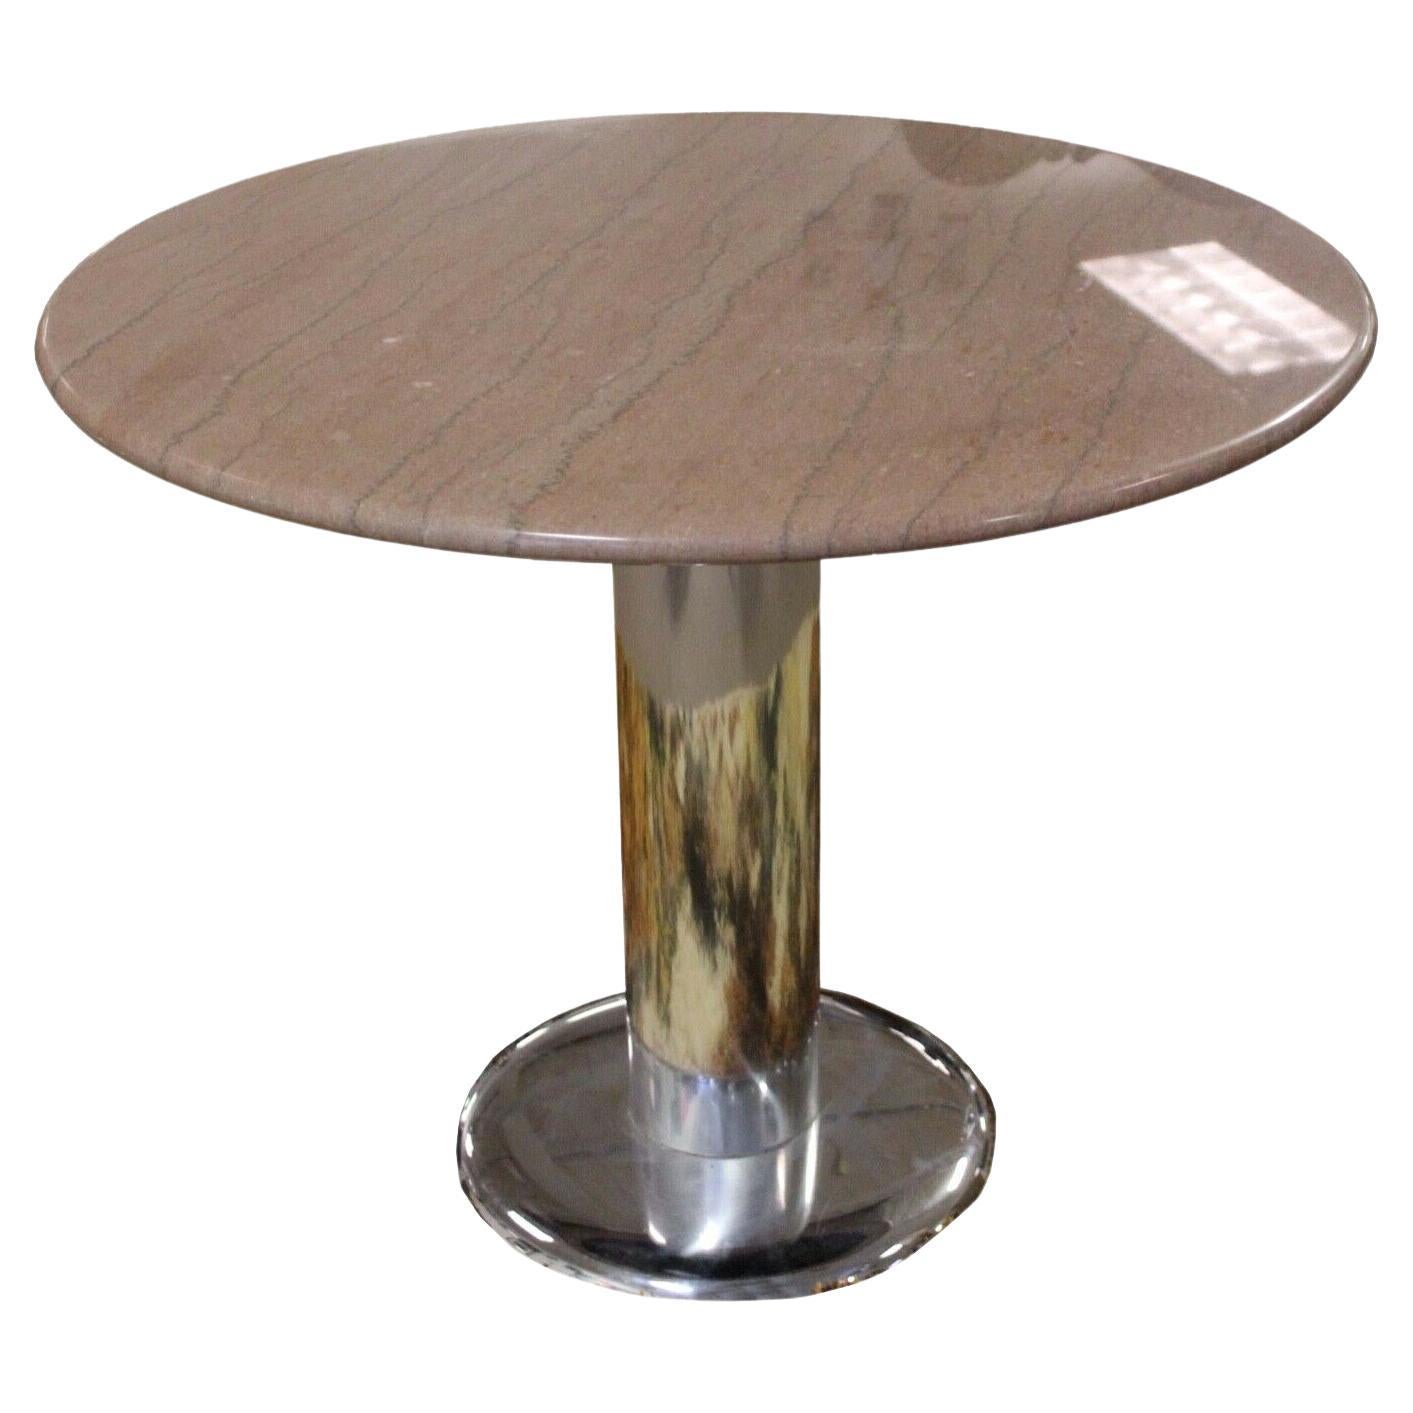 Postmodern Brueton Pink Marble and Polished Chrome Game Dinette Table